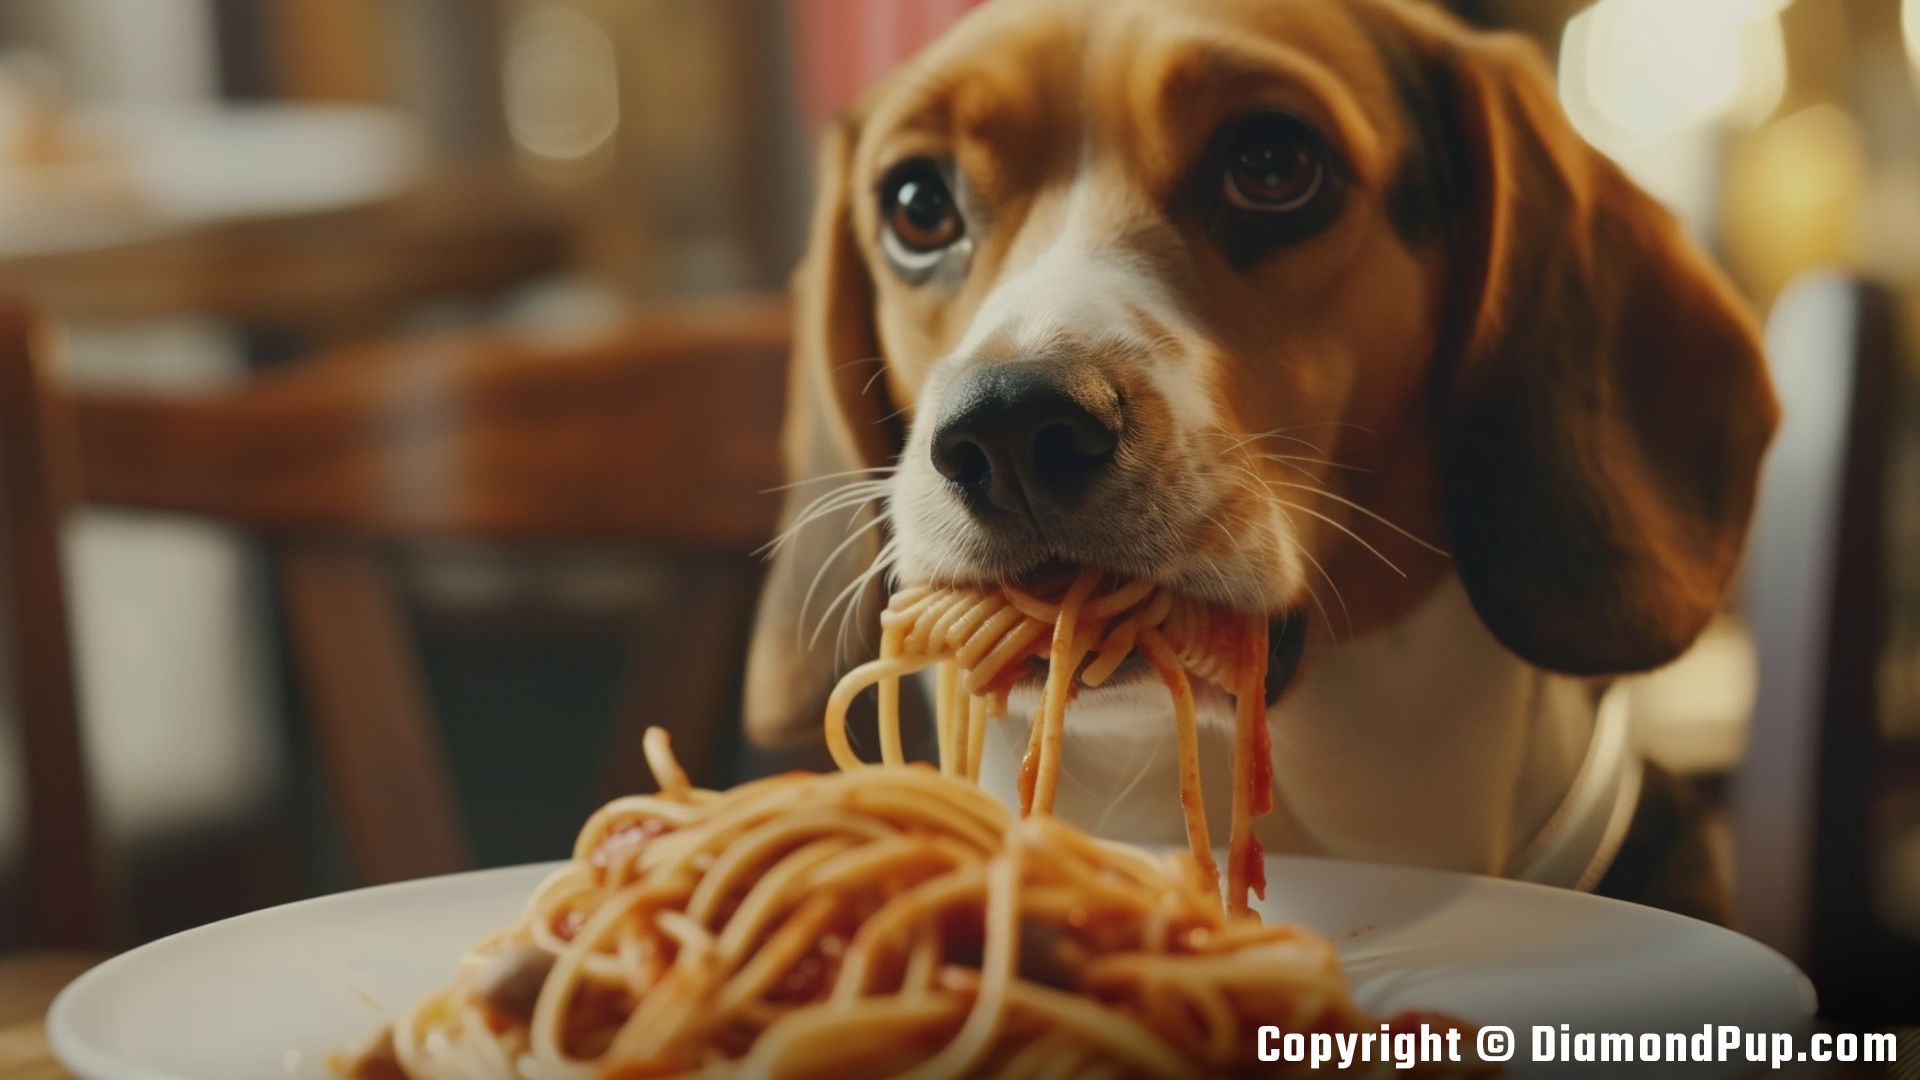 Photograph of an Adorable Beagle Snacking on Pasta